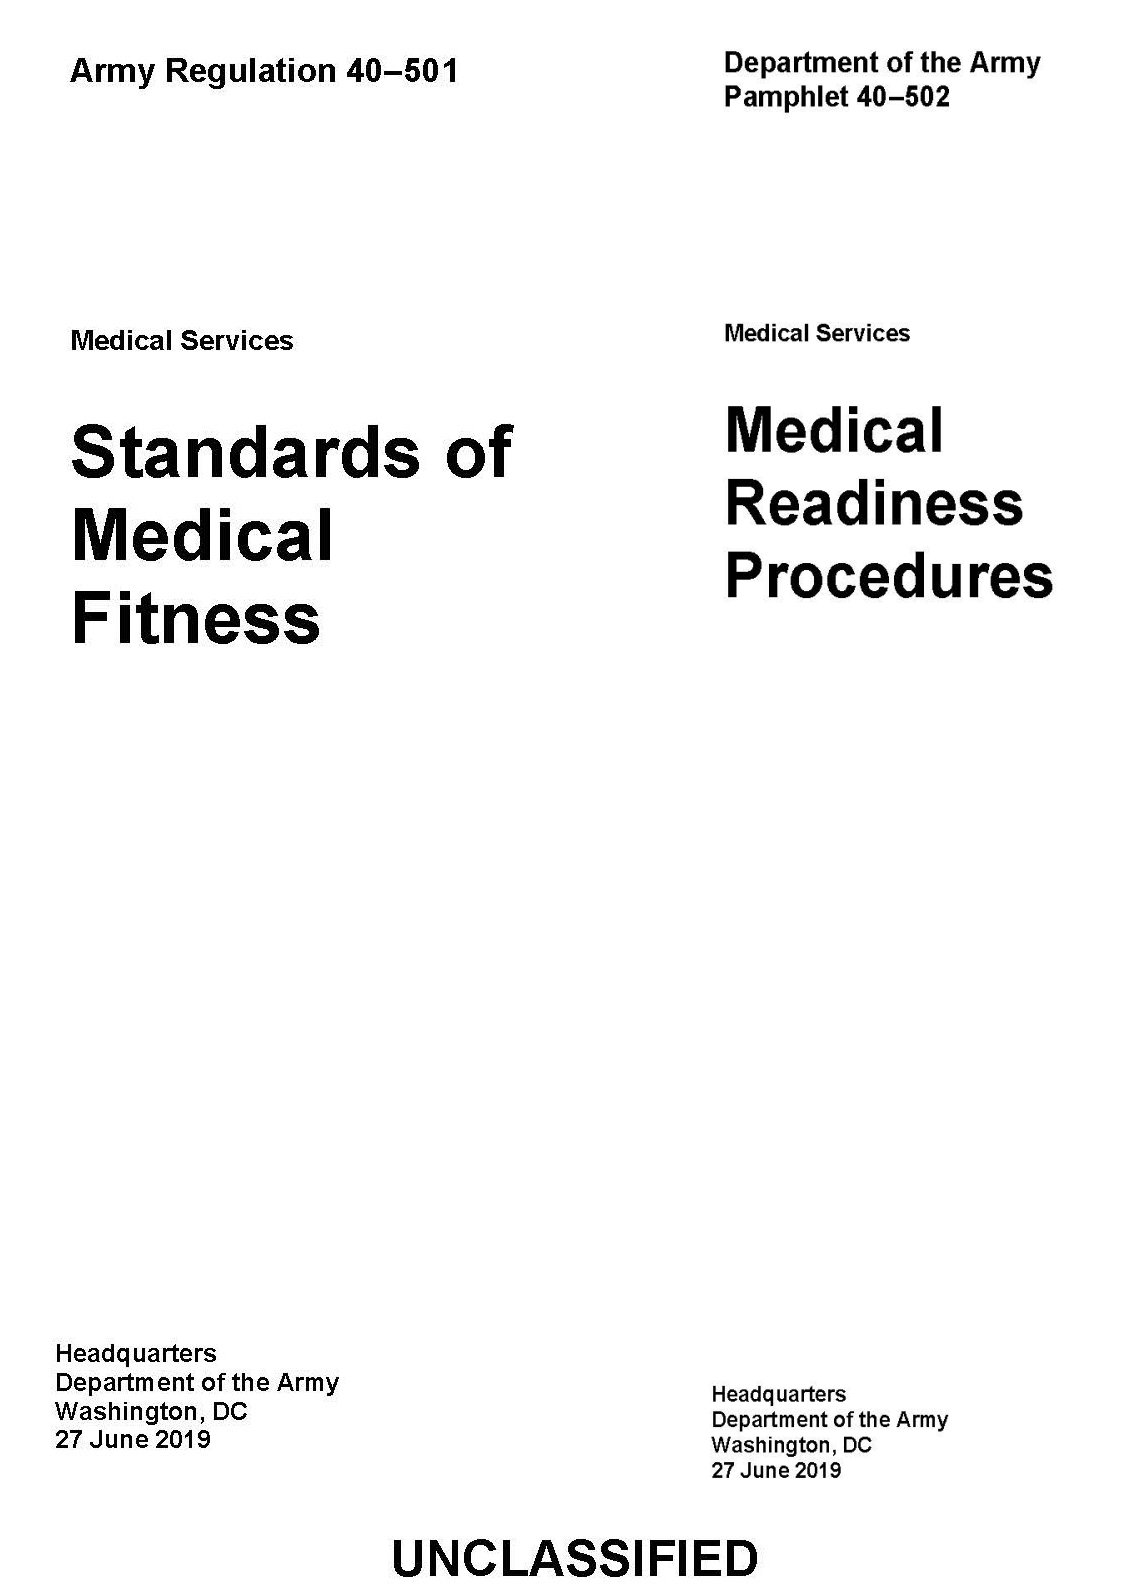 https://www.myarmypublications.com/images/COMBO%20front%20cover%20from%20AR%2040-501%20-%20Standards%20of%20Medical%20Fitness%20-%202019%20-%20and%20DA%20Pam%2040-502%20-%202019.jpg